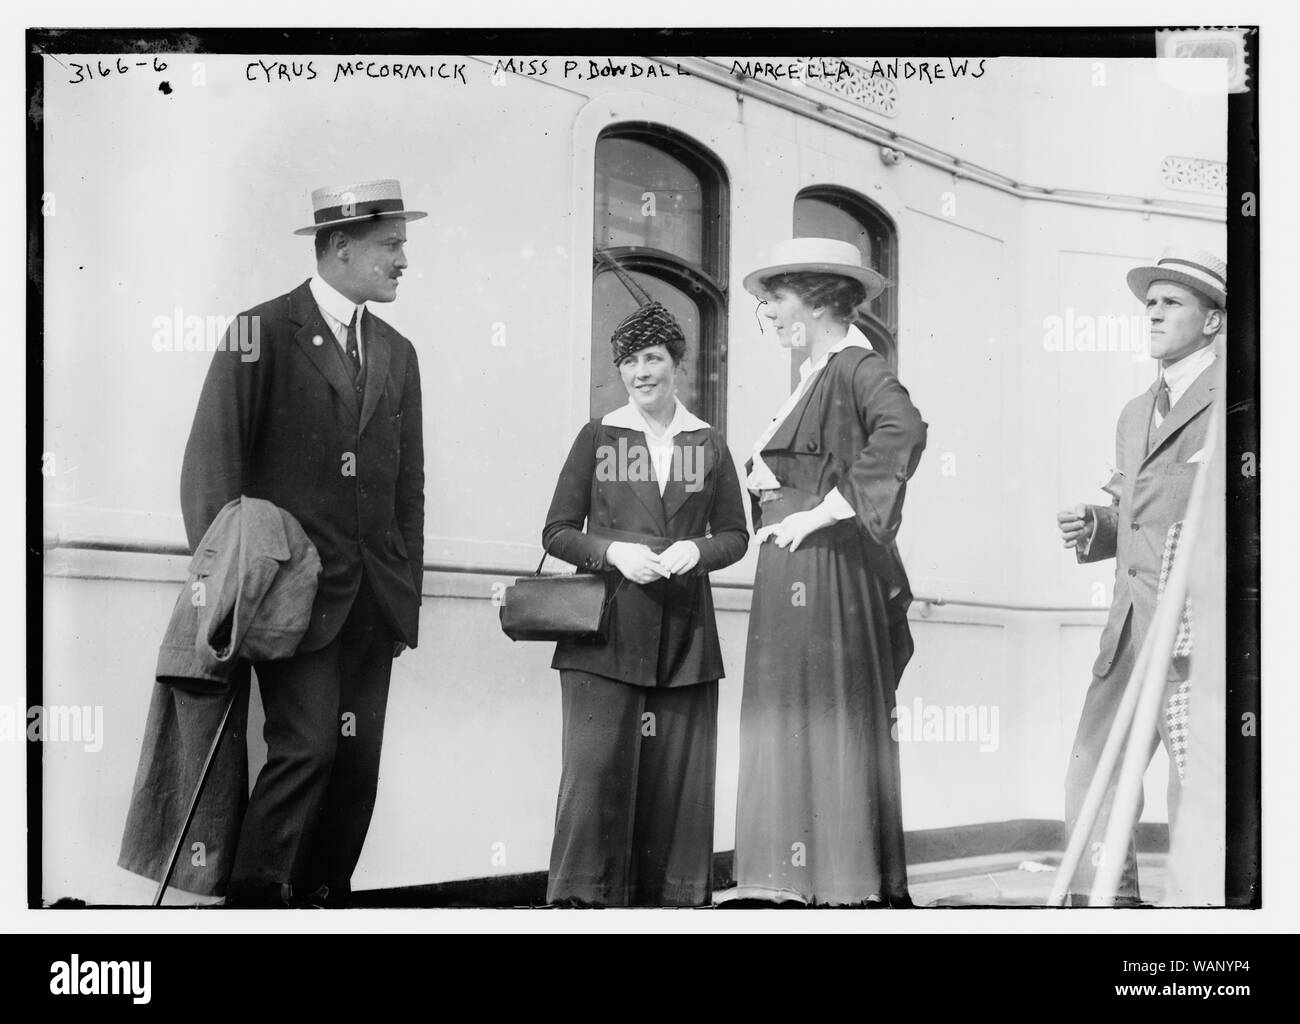 Cyrus McCormick -- Mlle P. Dowdall, Marcella Andrews Banque D'Images